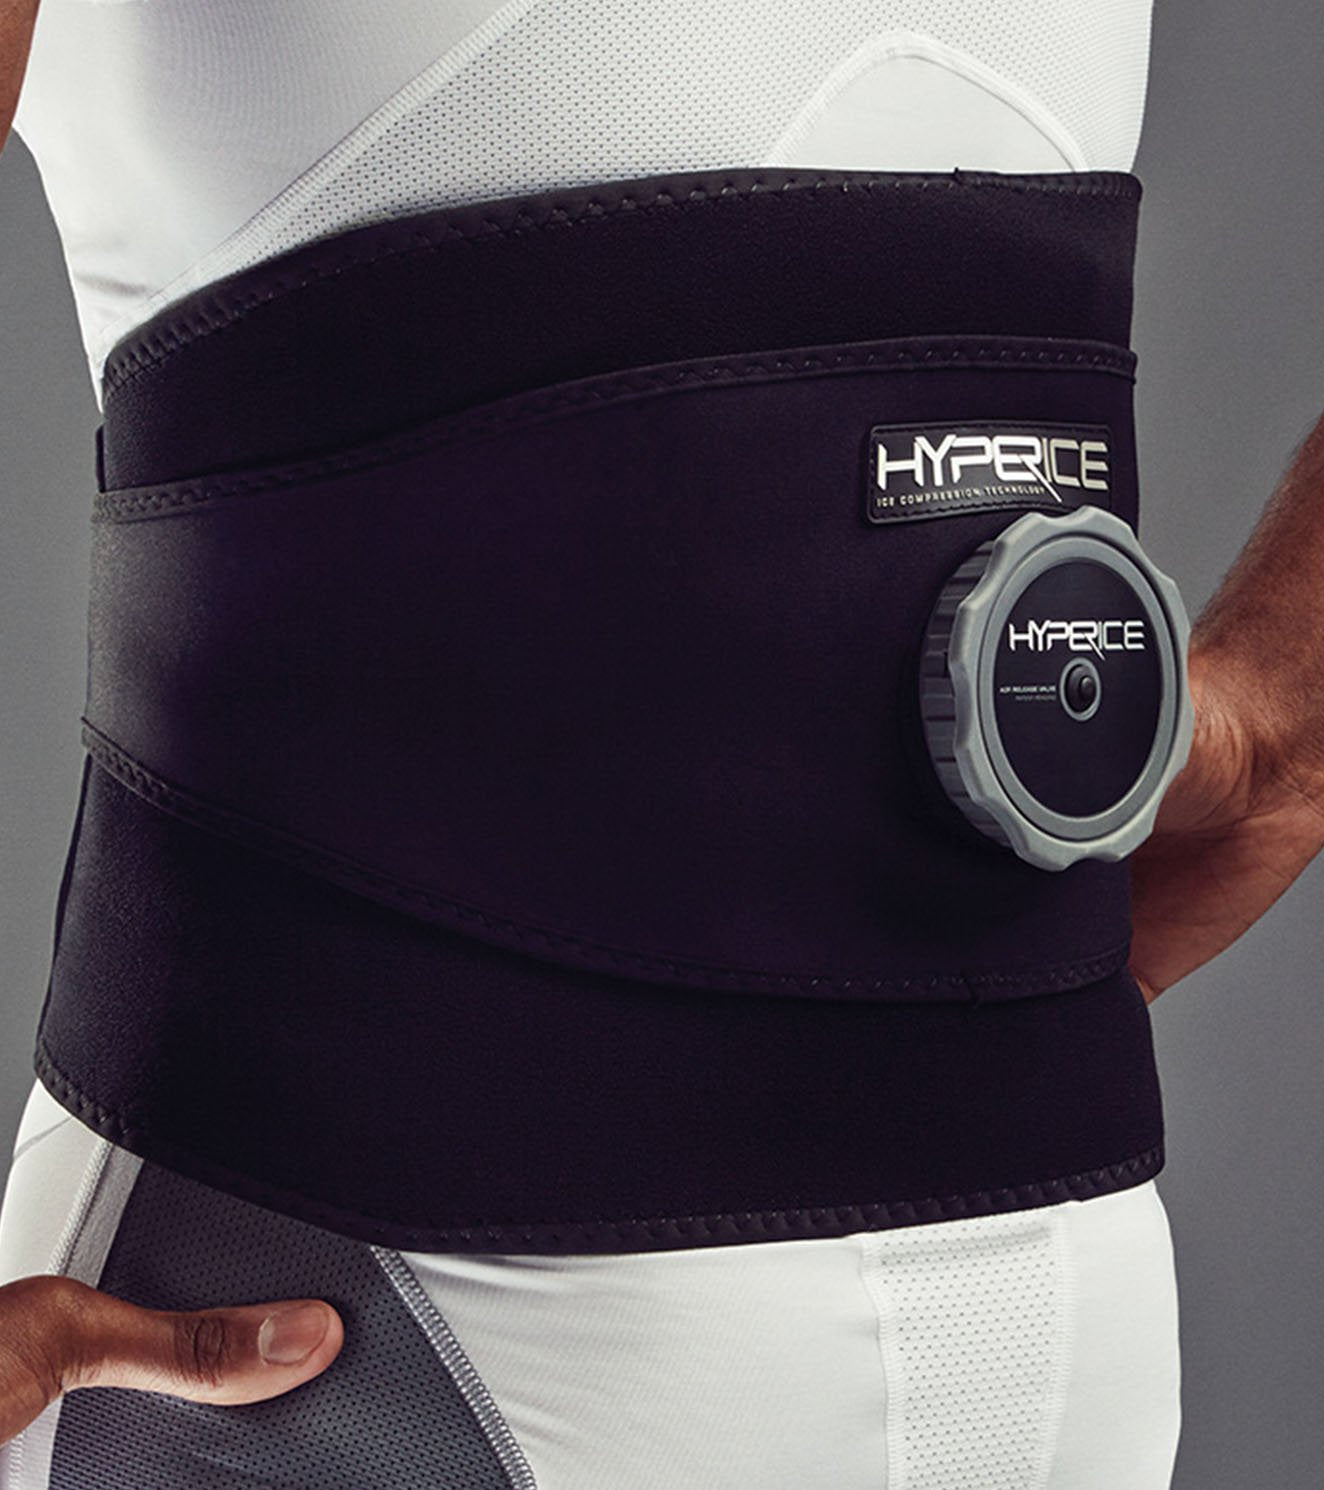 HYPERICE BACK (ICE COMPRESSION TECHNOLOGY) - Hyperice India